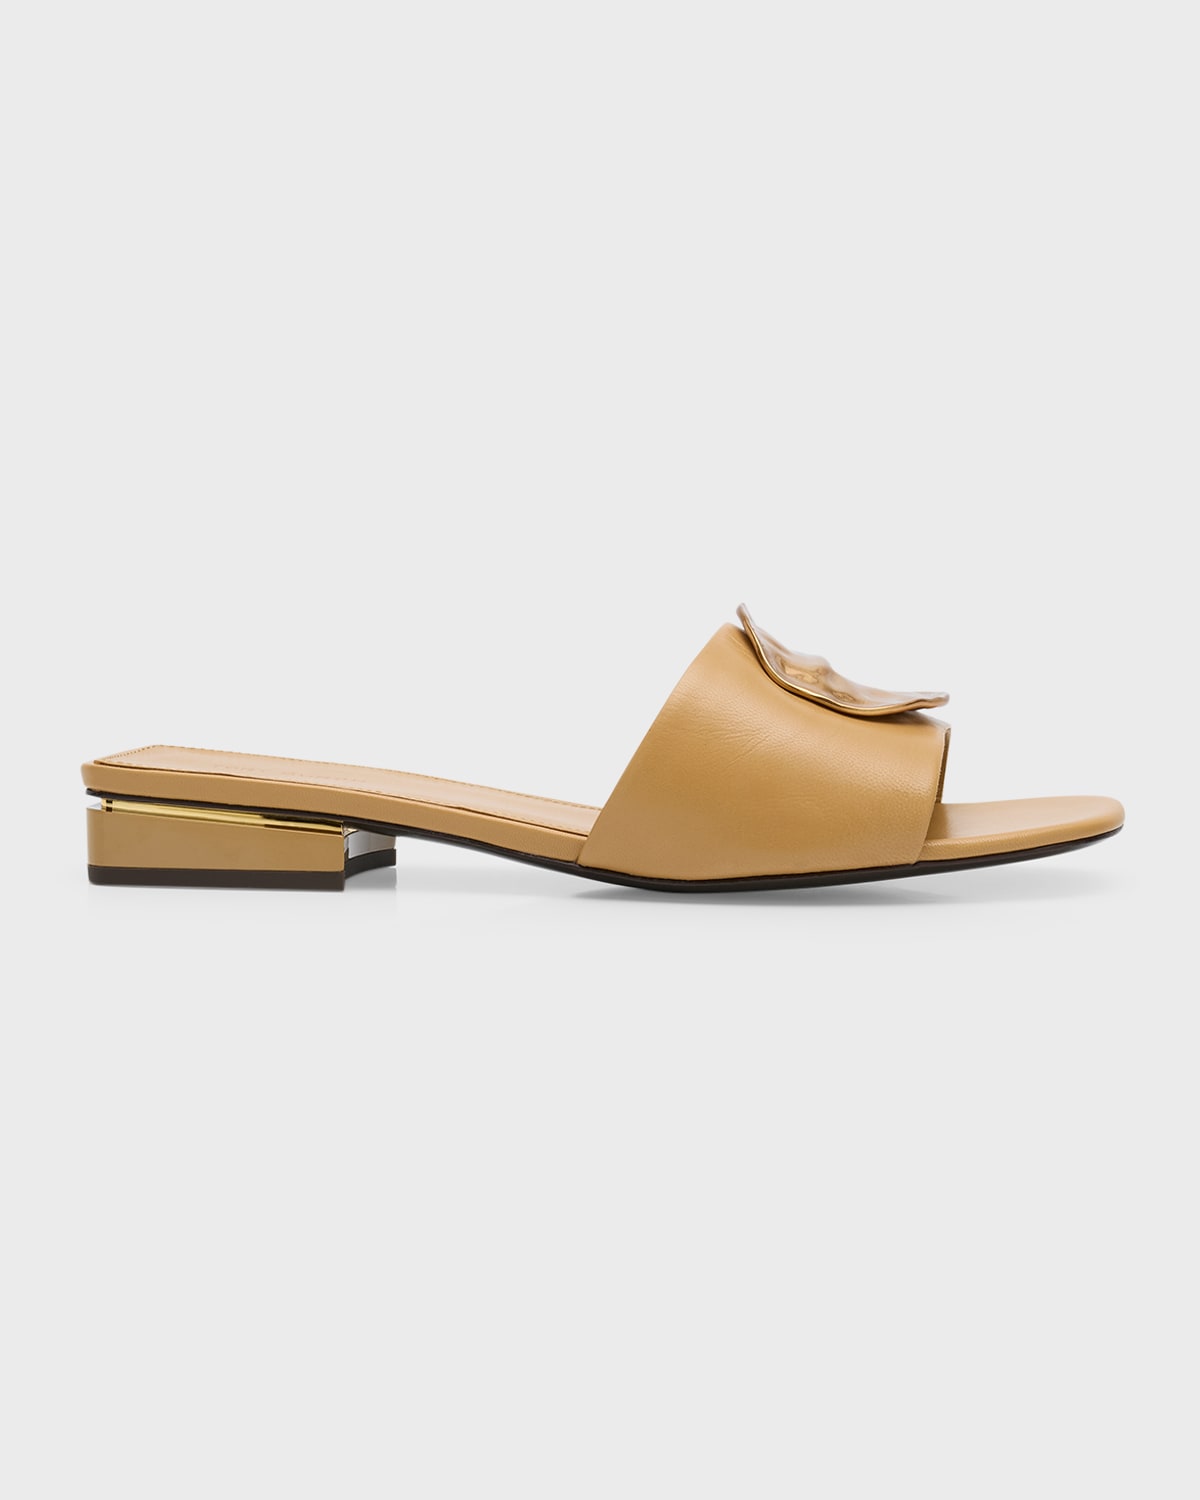 TORY BURCH PATOS DISC LEATHER SLIDE SANDALS